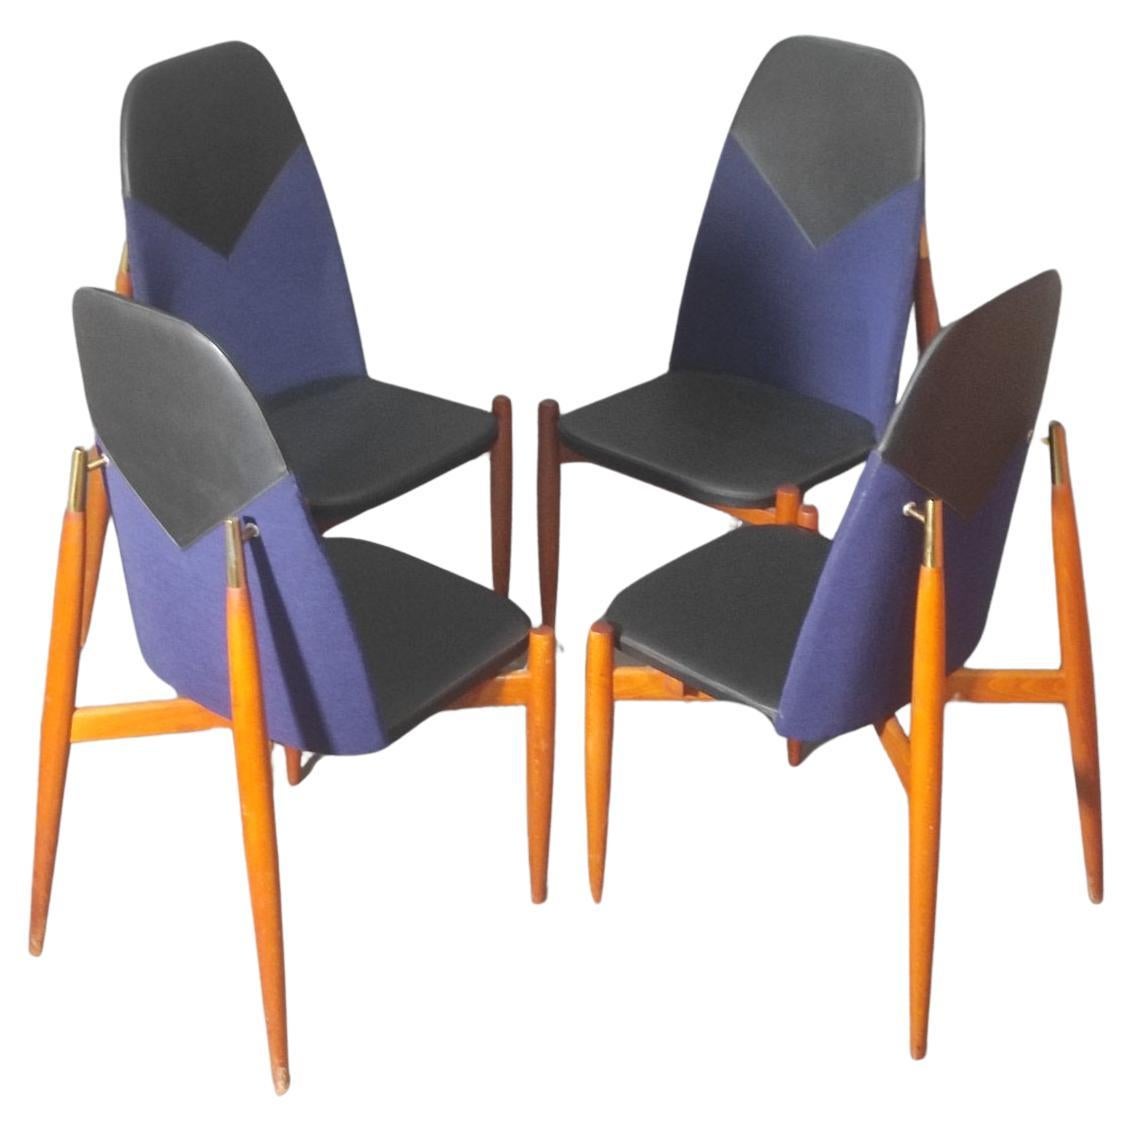 Set of Four Dining Chair By Miroslav Navratil 1960s For Sale